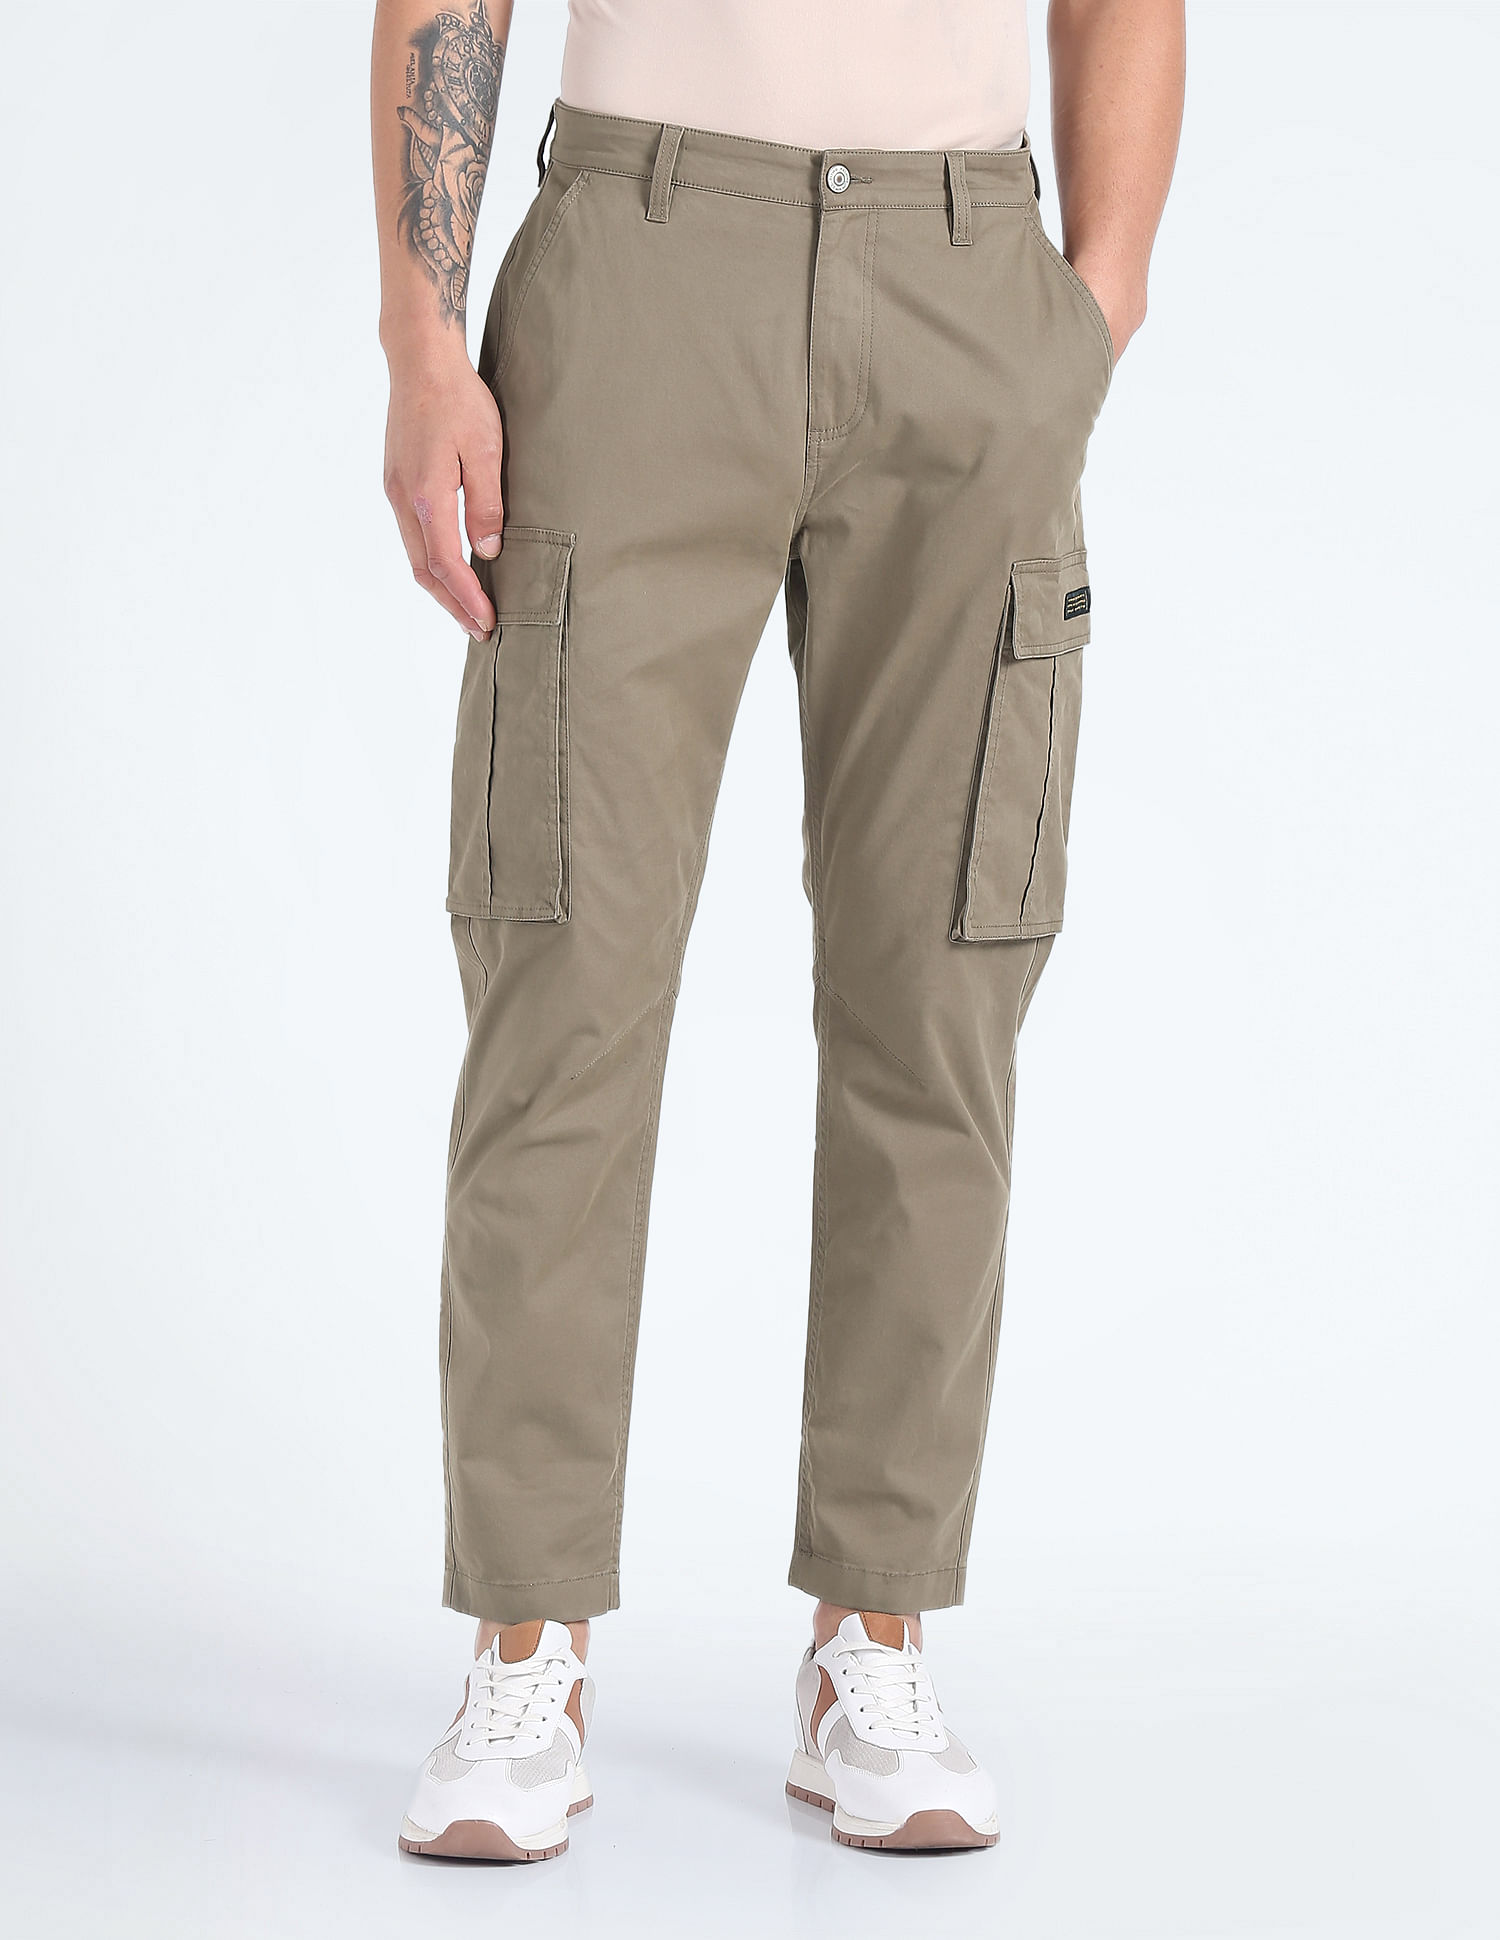 Buy Mens Cargo Pants Online In India At Discounted Prices